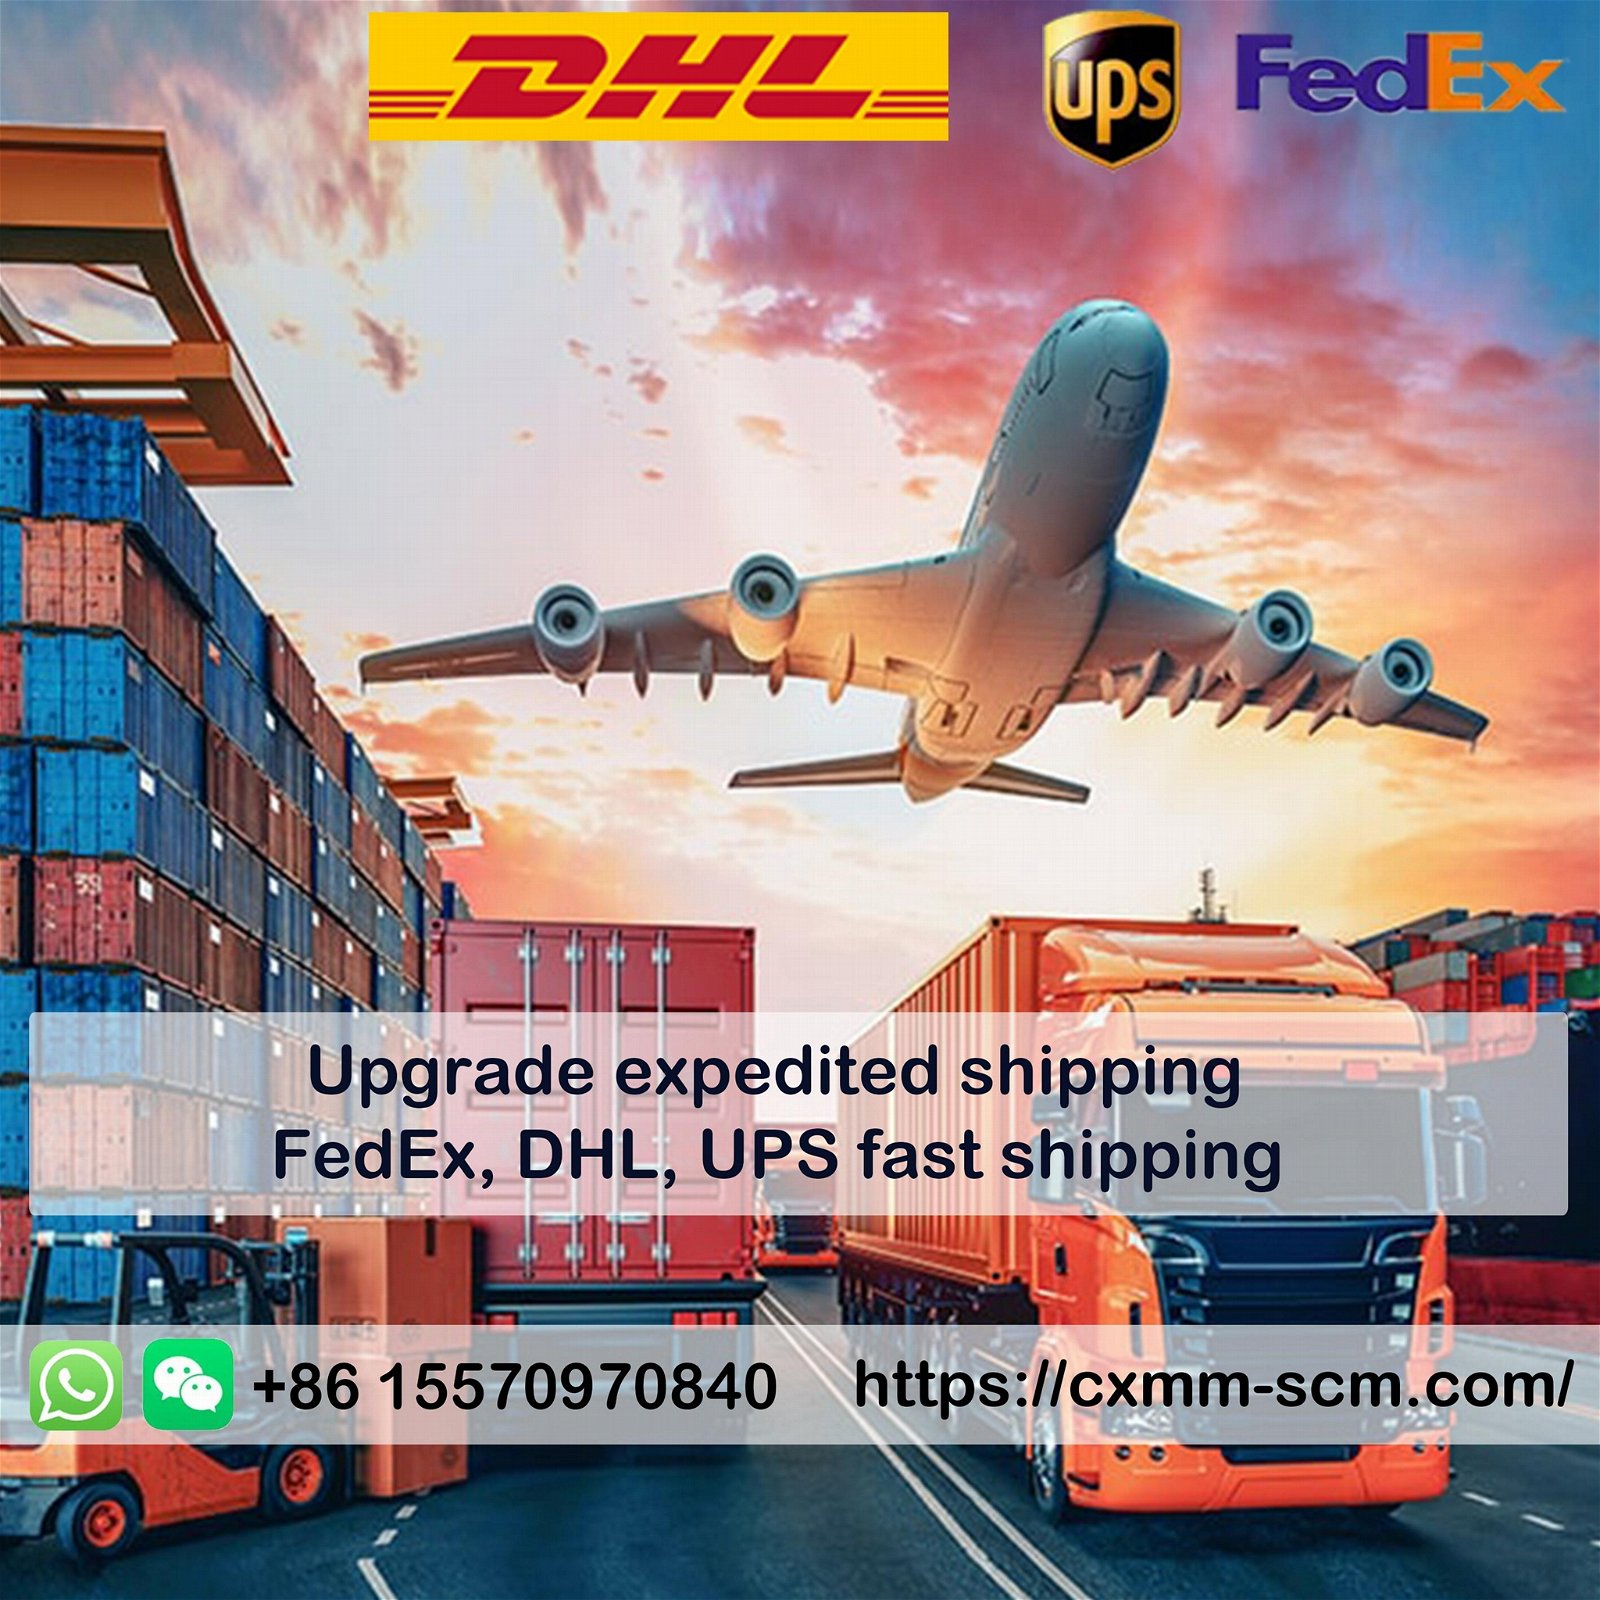 Upgrade expedited shipping FedEx, DHL, UPS fast shipping